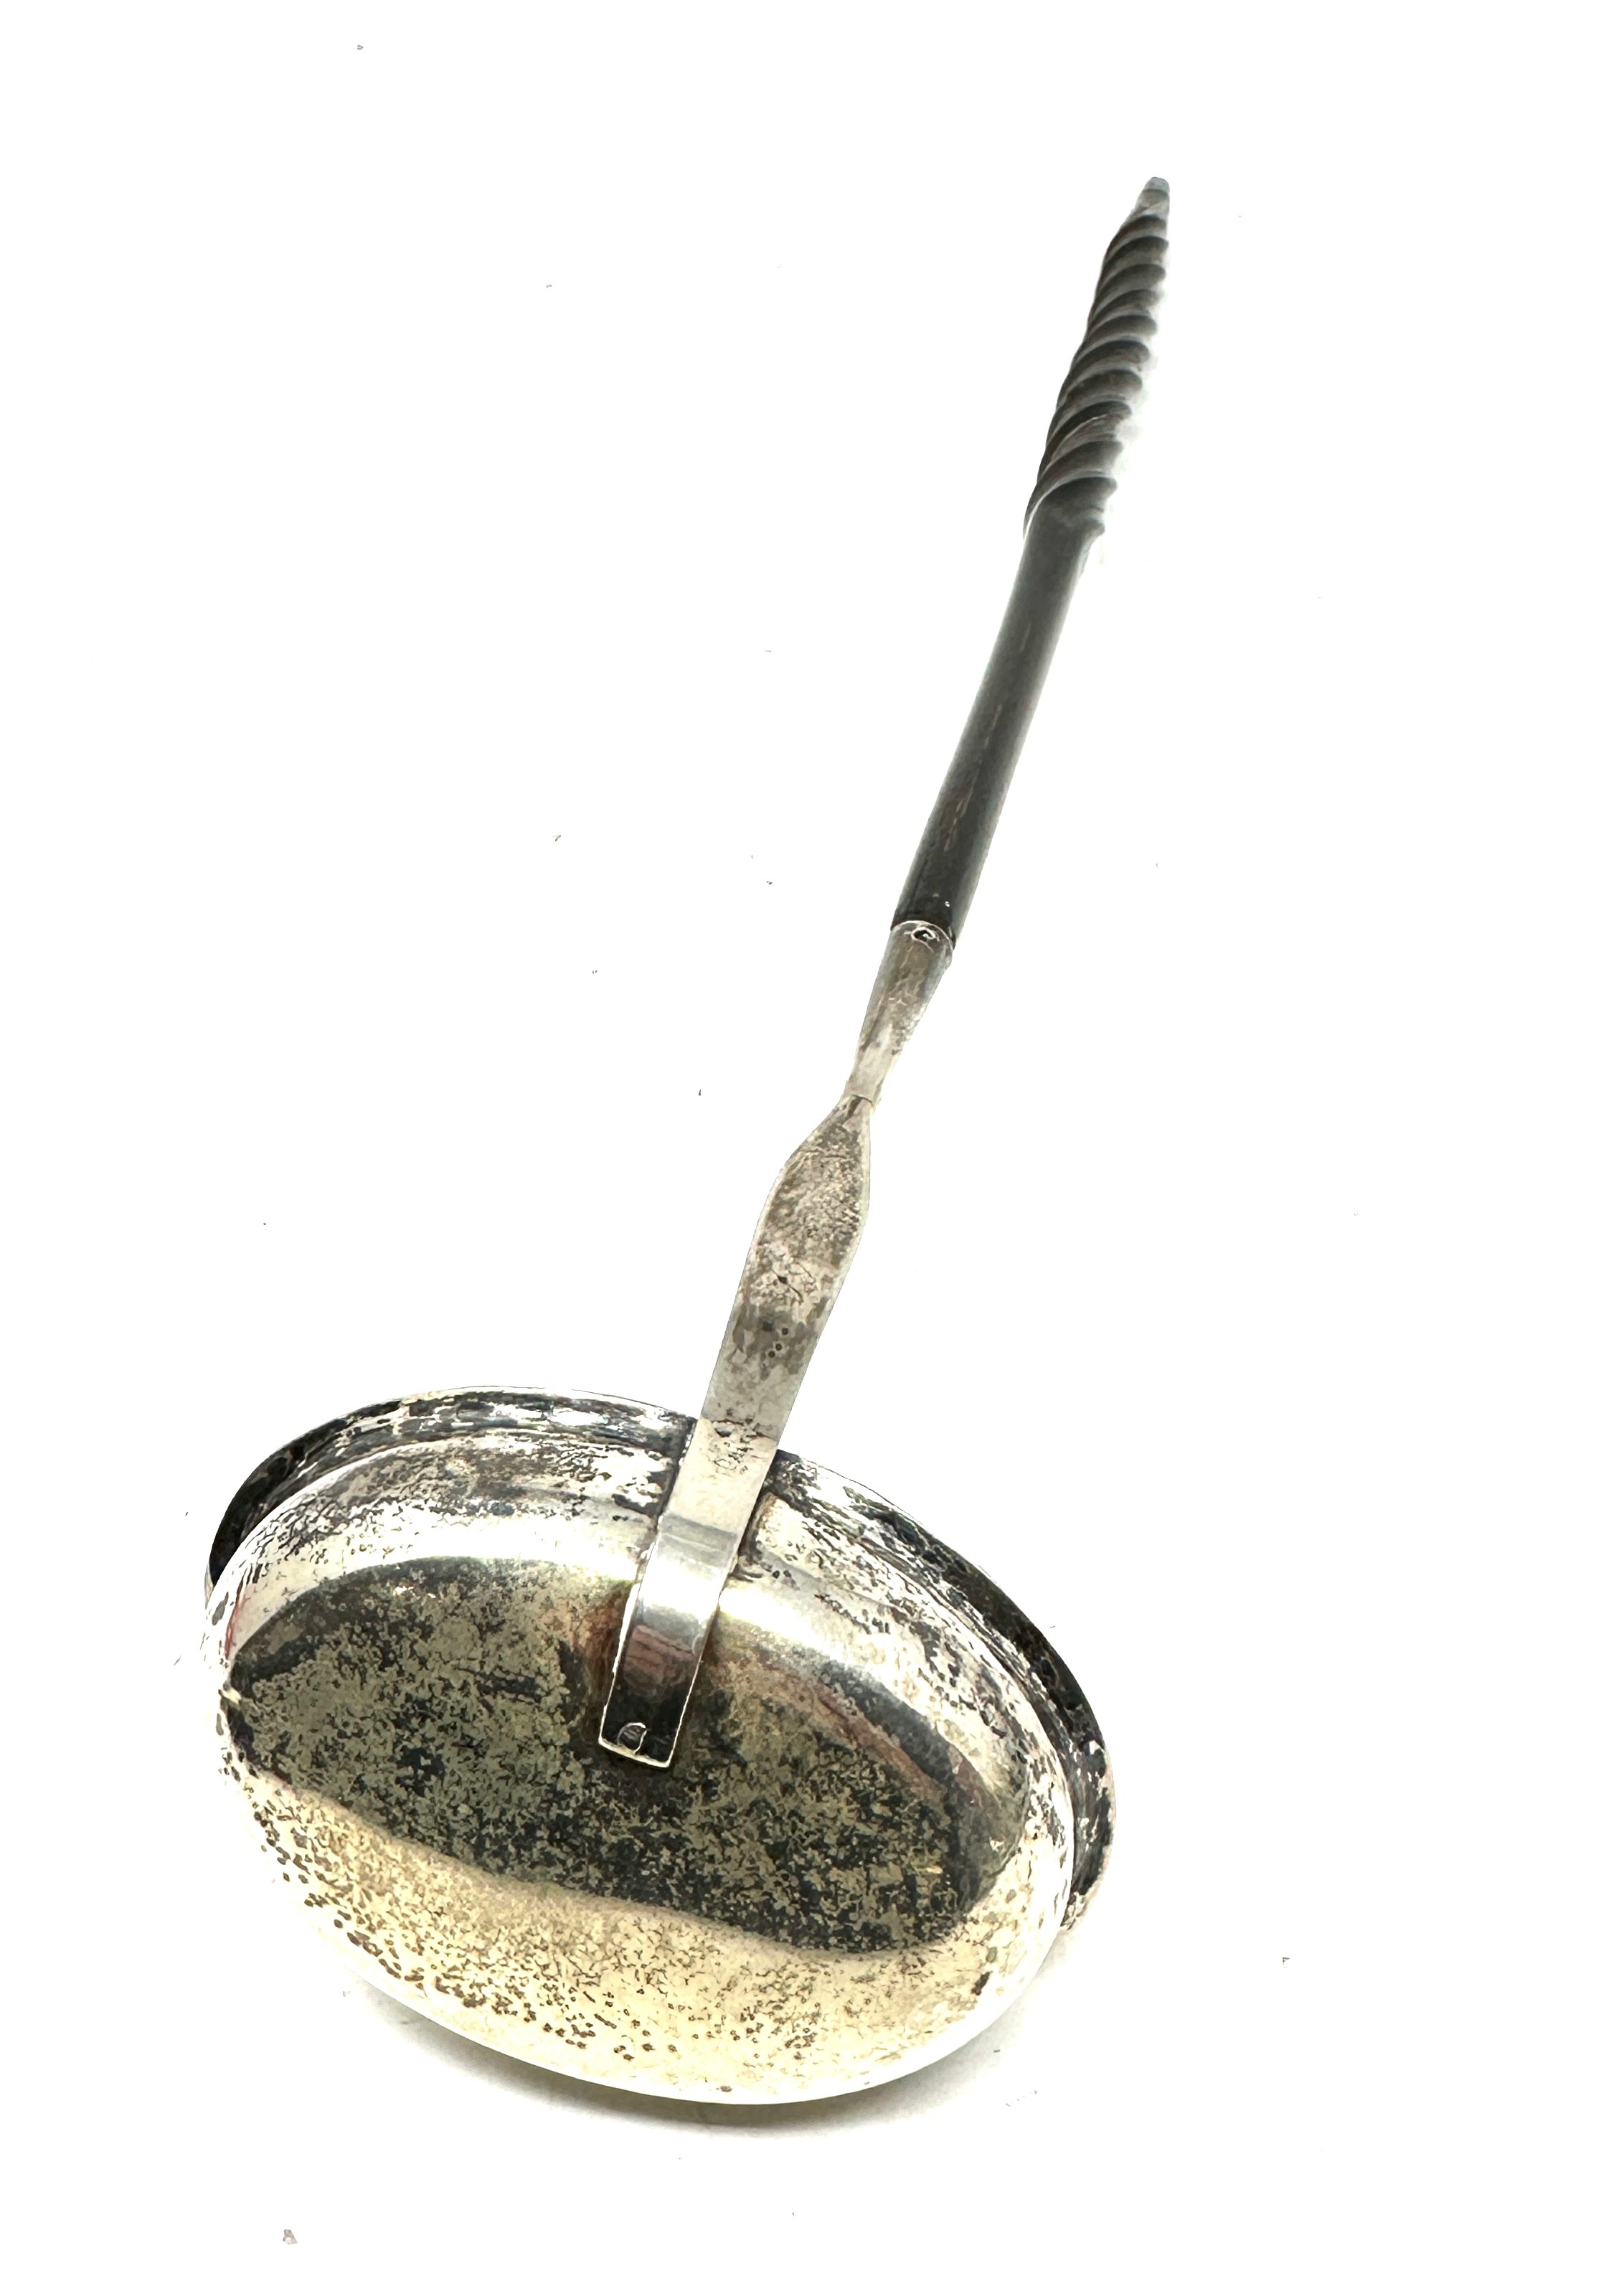 Antique silver toddy ladle - Image 3 of 3